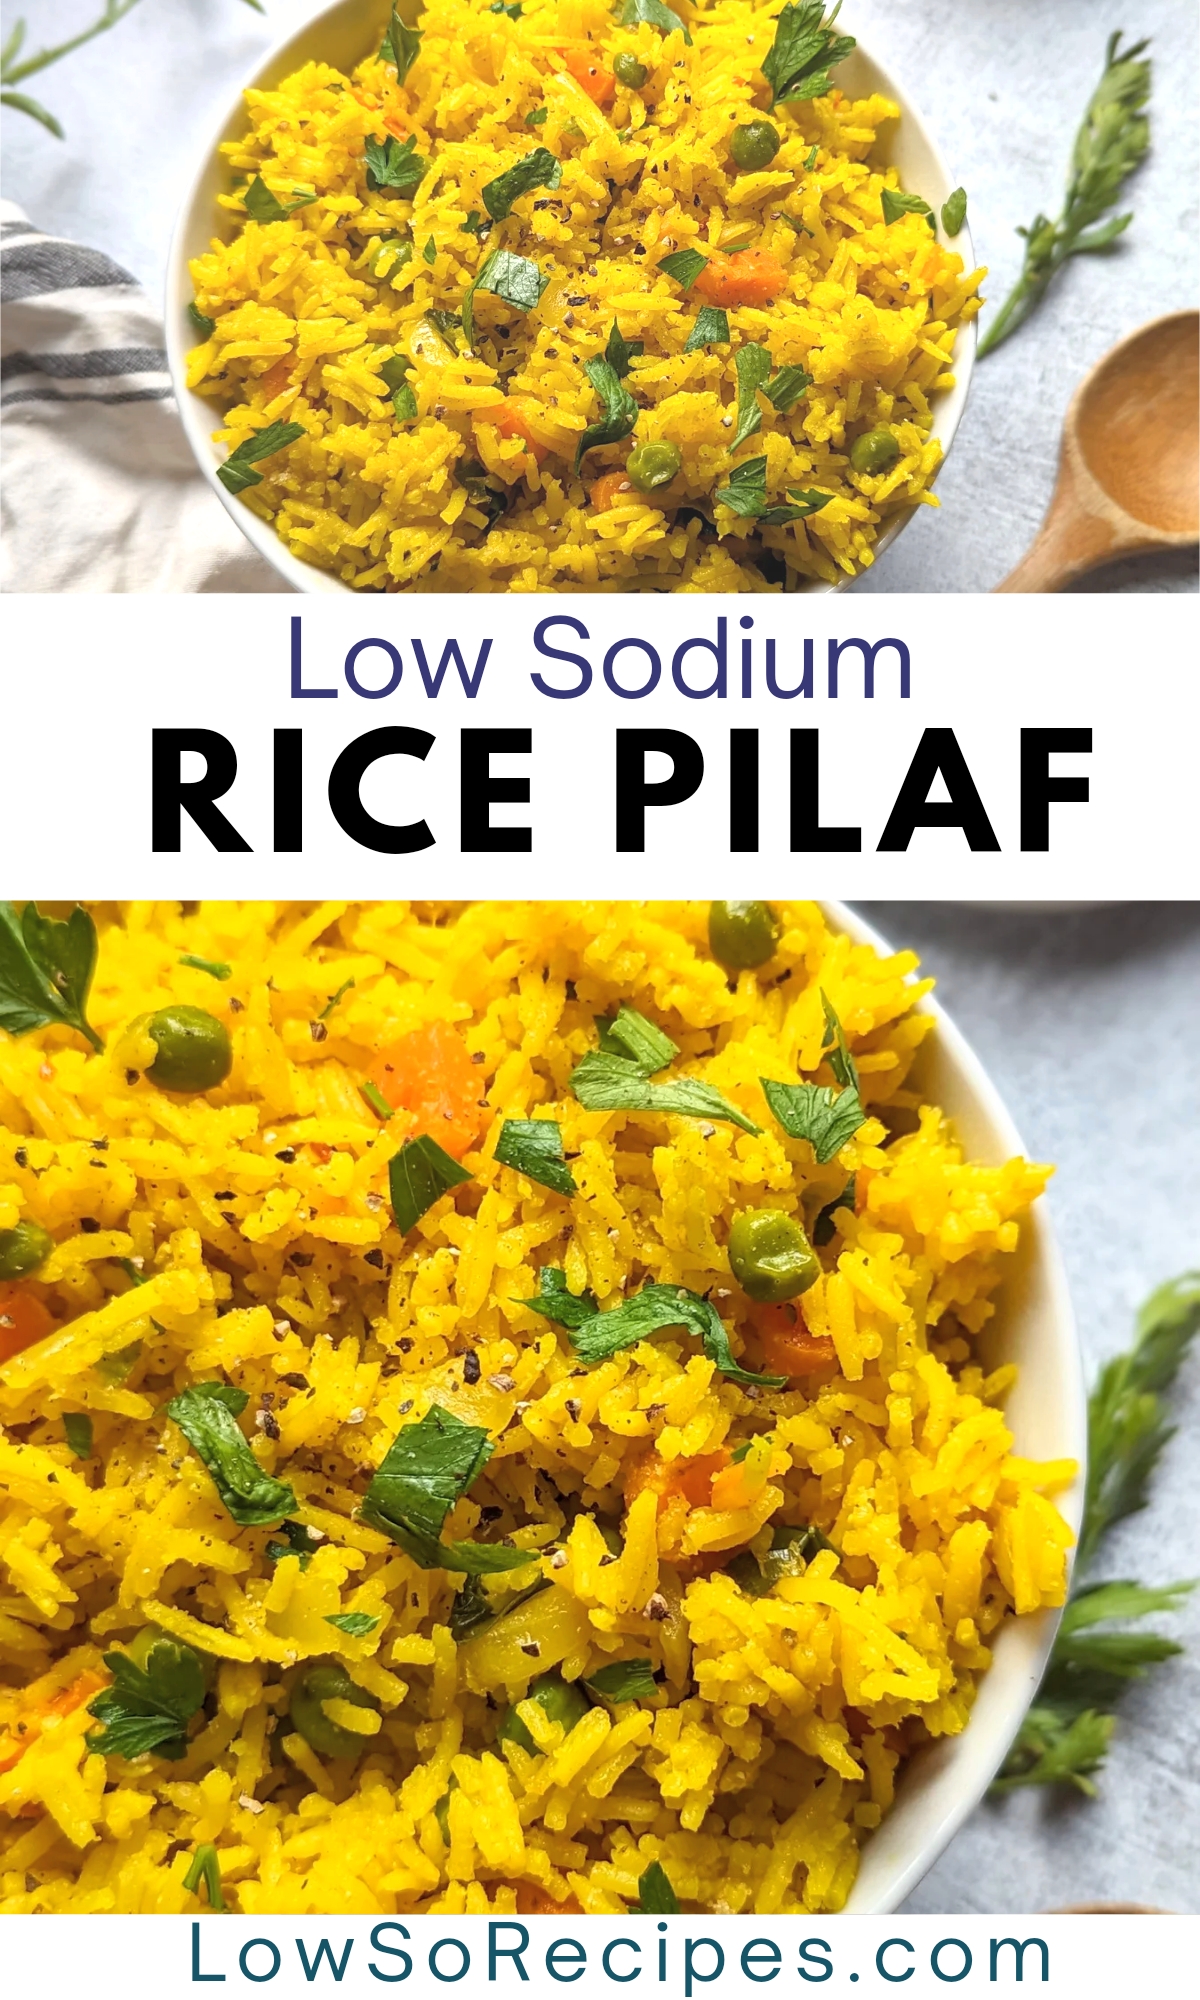 low sodium rice pilaf recipe no salt added rice ideas with vegetables and herbs